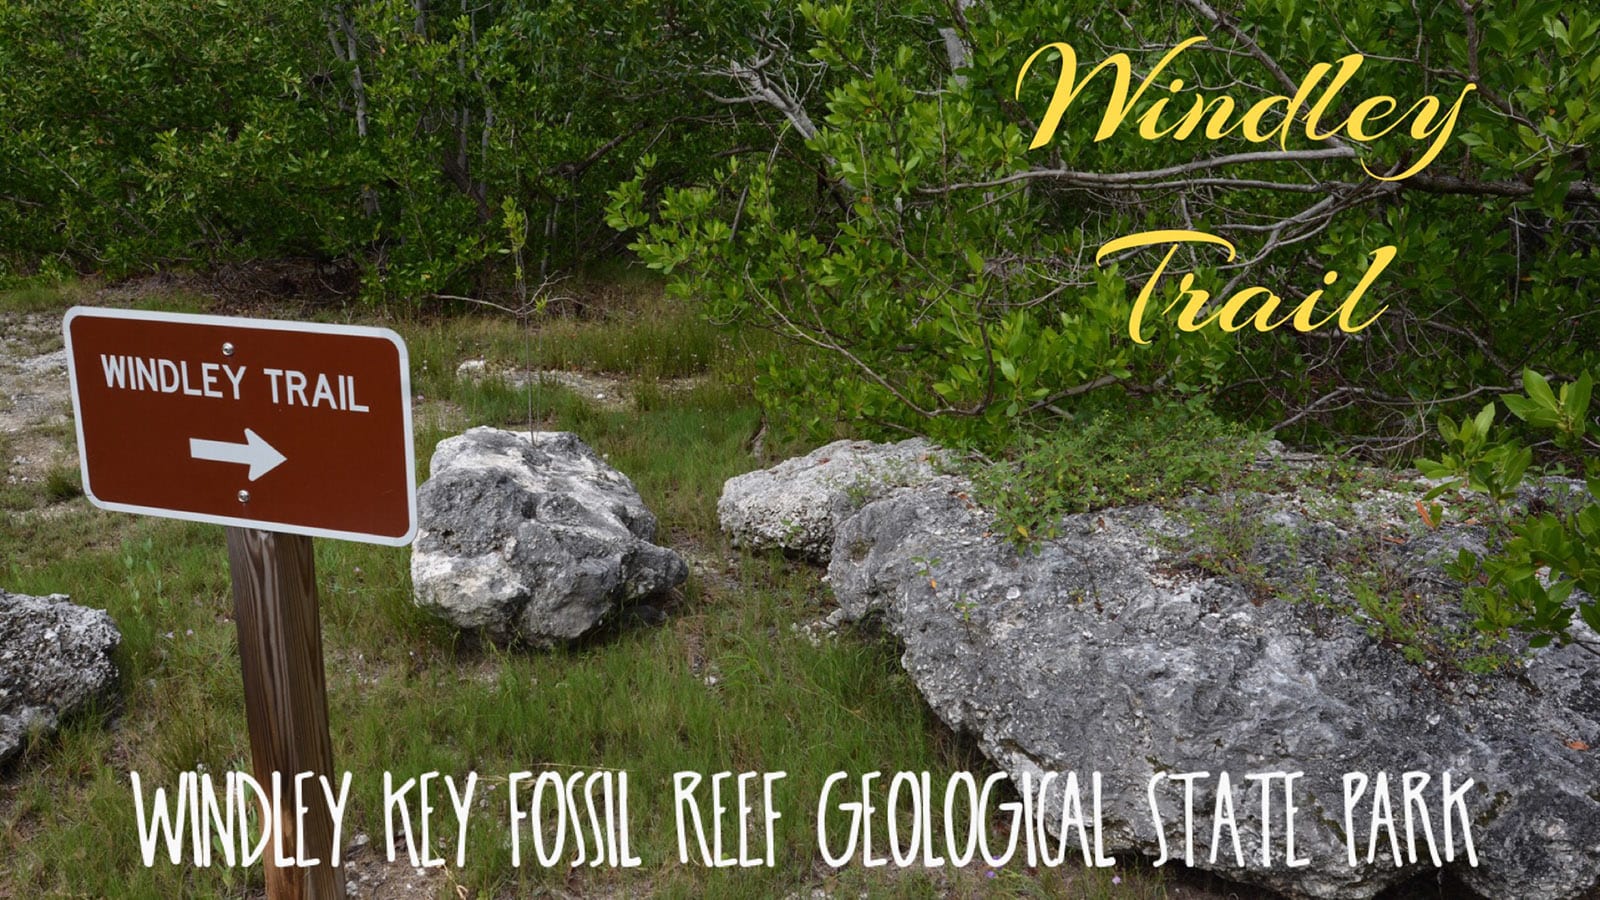 Windley Key Fossil Reef Geological State Park